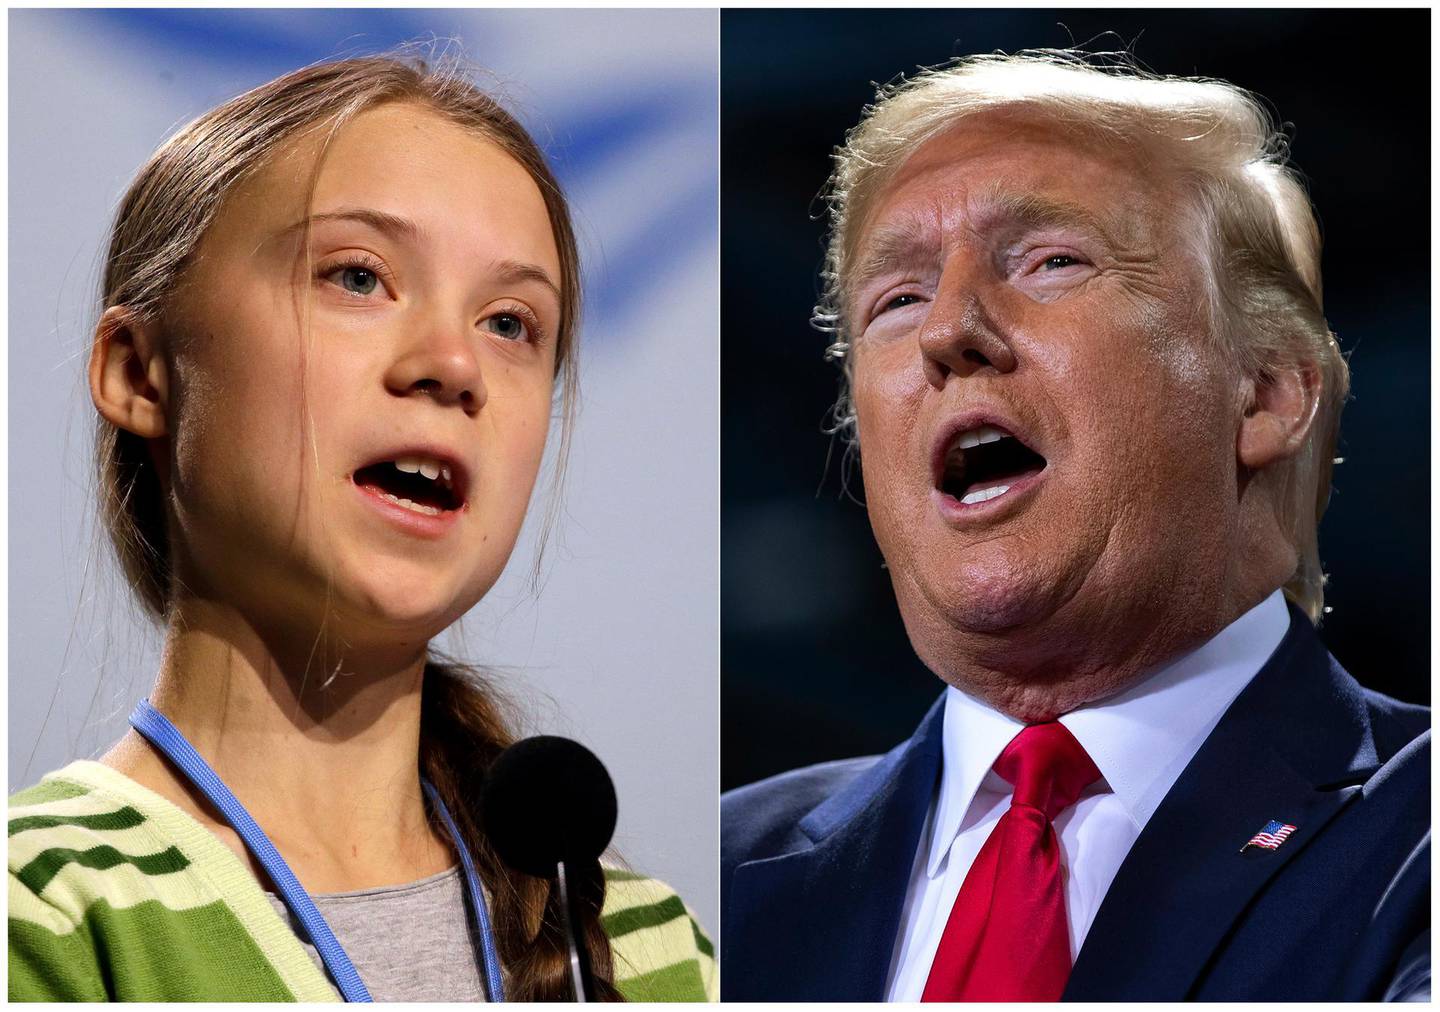 This combination photo shows Swedish climate activist Greta Thunberg speaking at the COP25 summit in Madrid, Spain on Dec. 11, 2019, left, and President Donald Trump speaking at a campaign rally in Battle Creek, Mich. on Dec. 18, 2019. When climate activist Greta Thunberg, also 16, was named Time magazine's 2019 person of the year, President Donald Trump took to Twitter to call her choice â€œridiculous." (AP Photo/Paul White, left, and Evan Vucci)